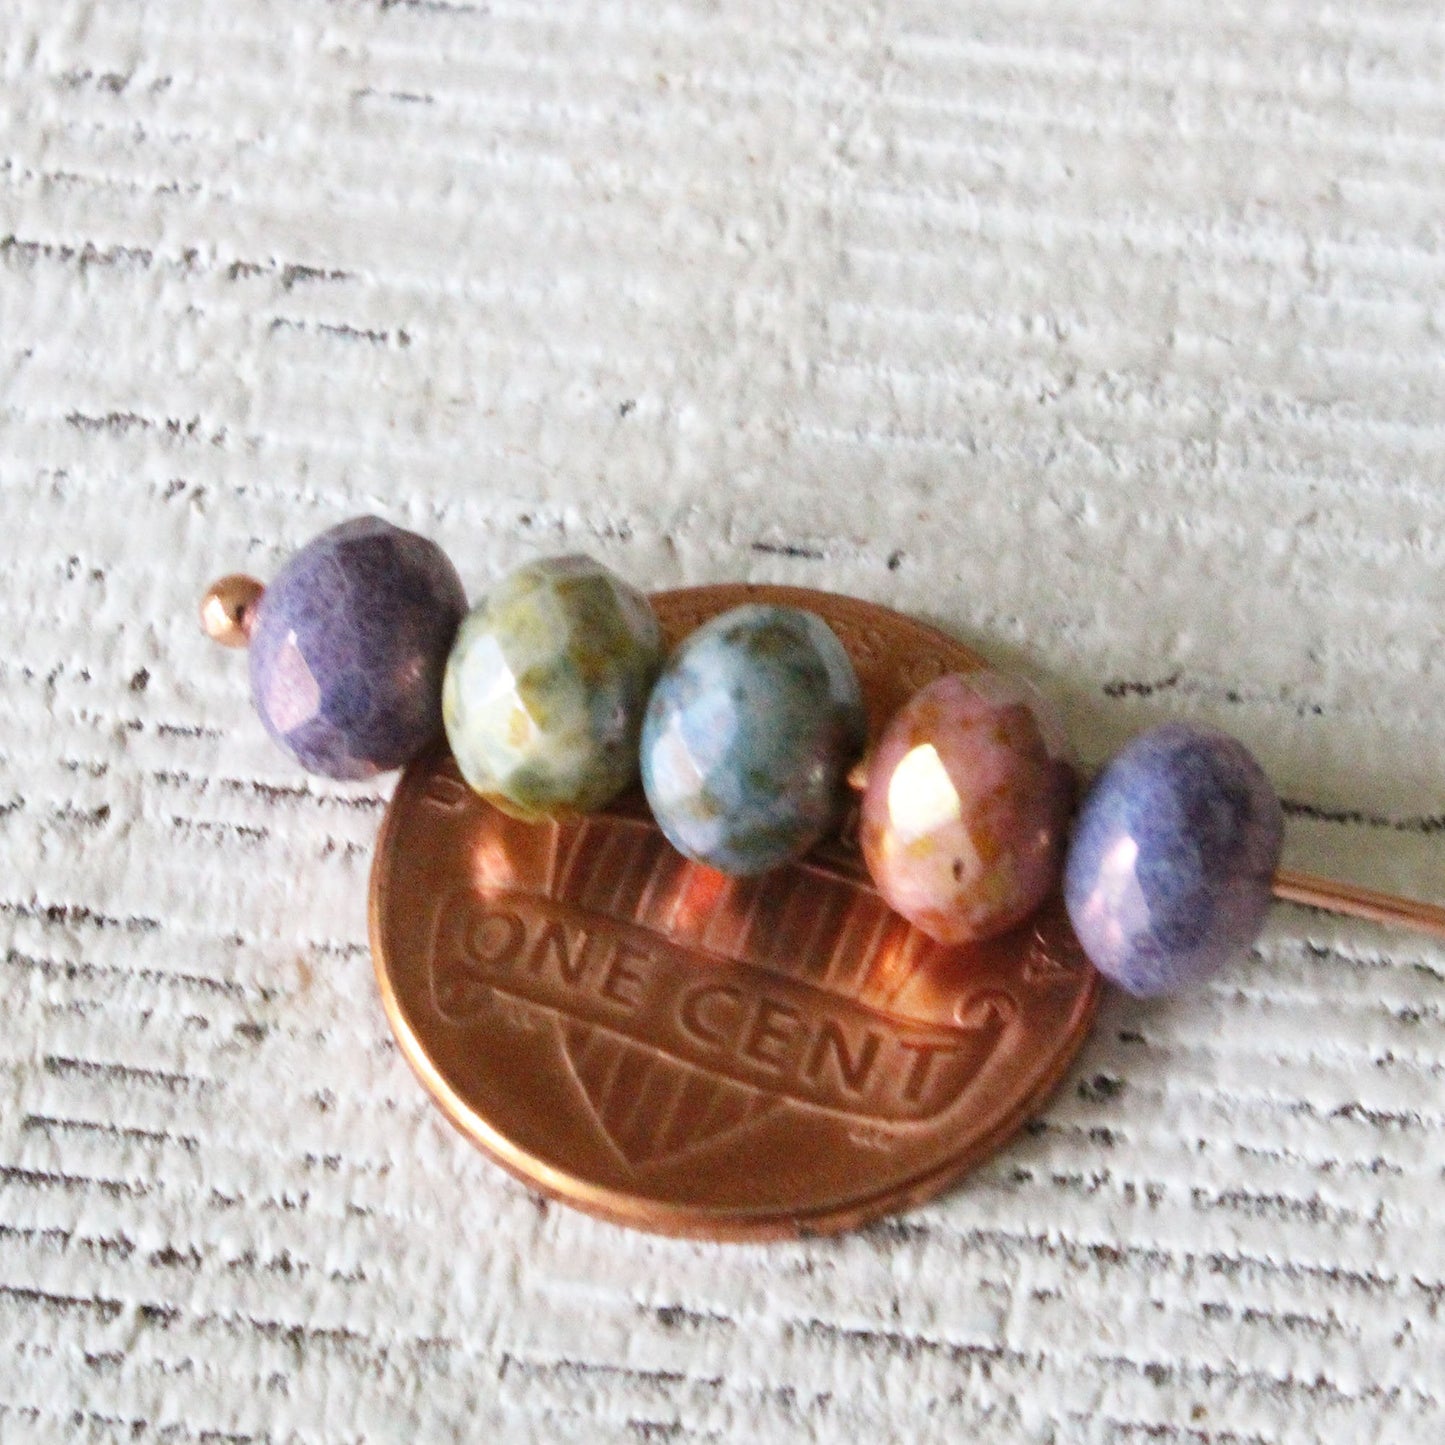 5x7mm Rondelle Beads - Grape, Apricot, Stone and Sage Picasso Mix - 25 Beads